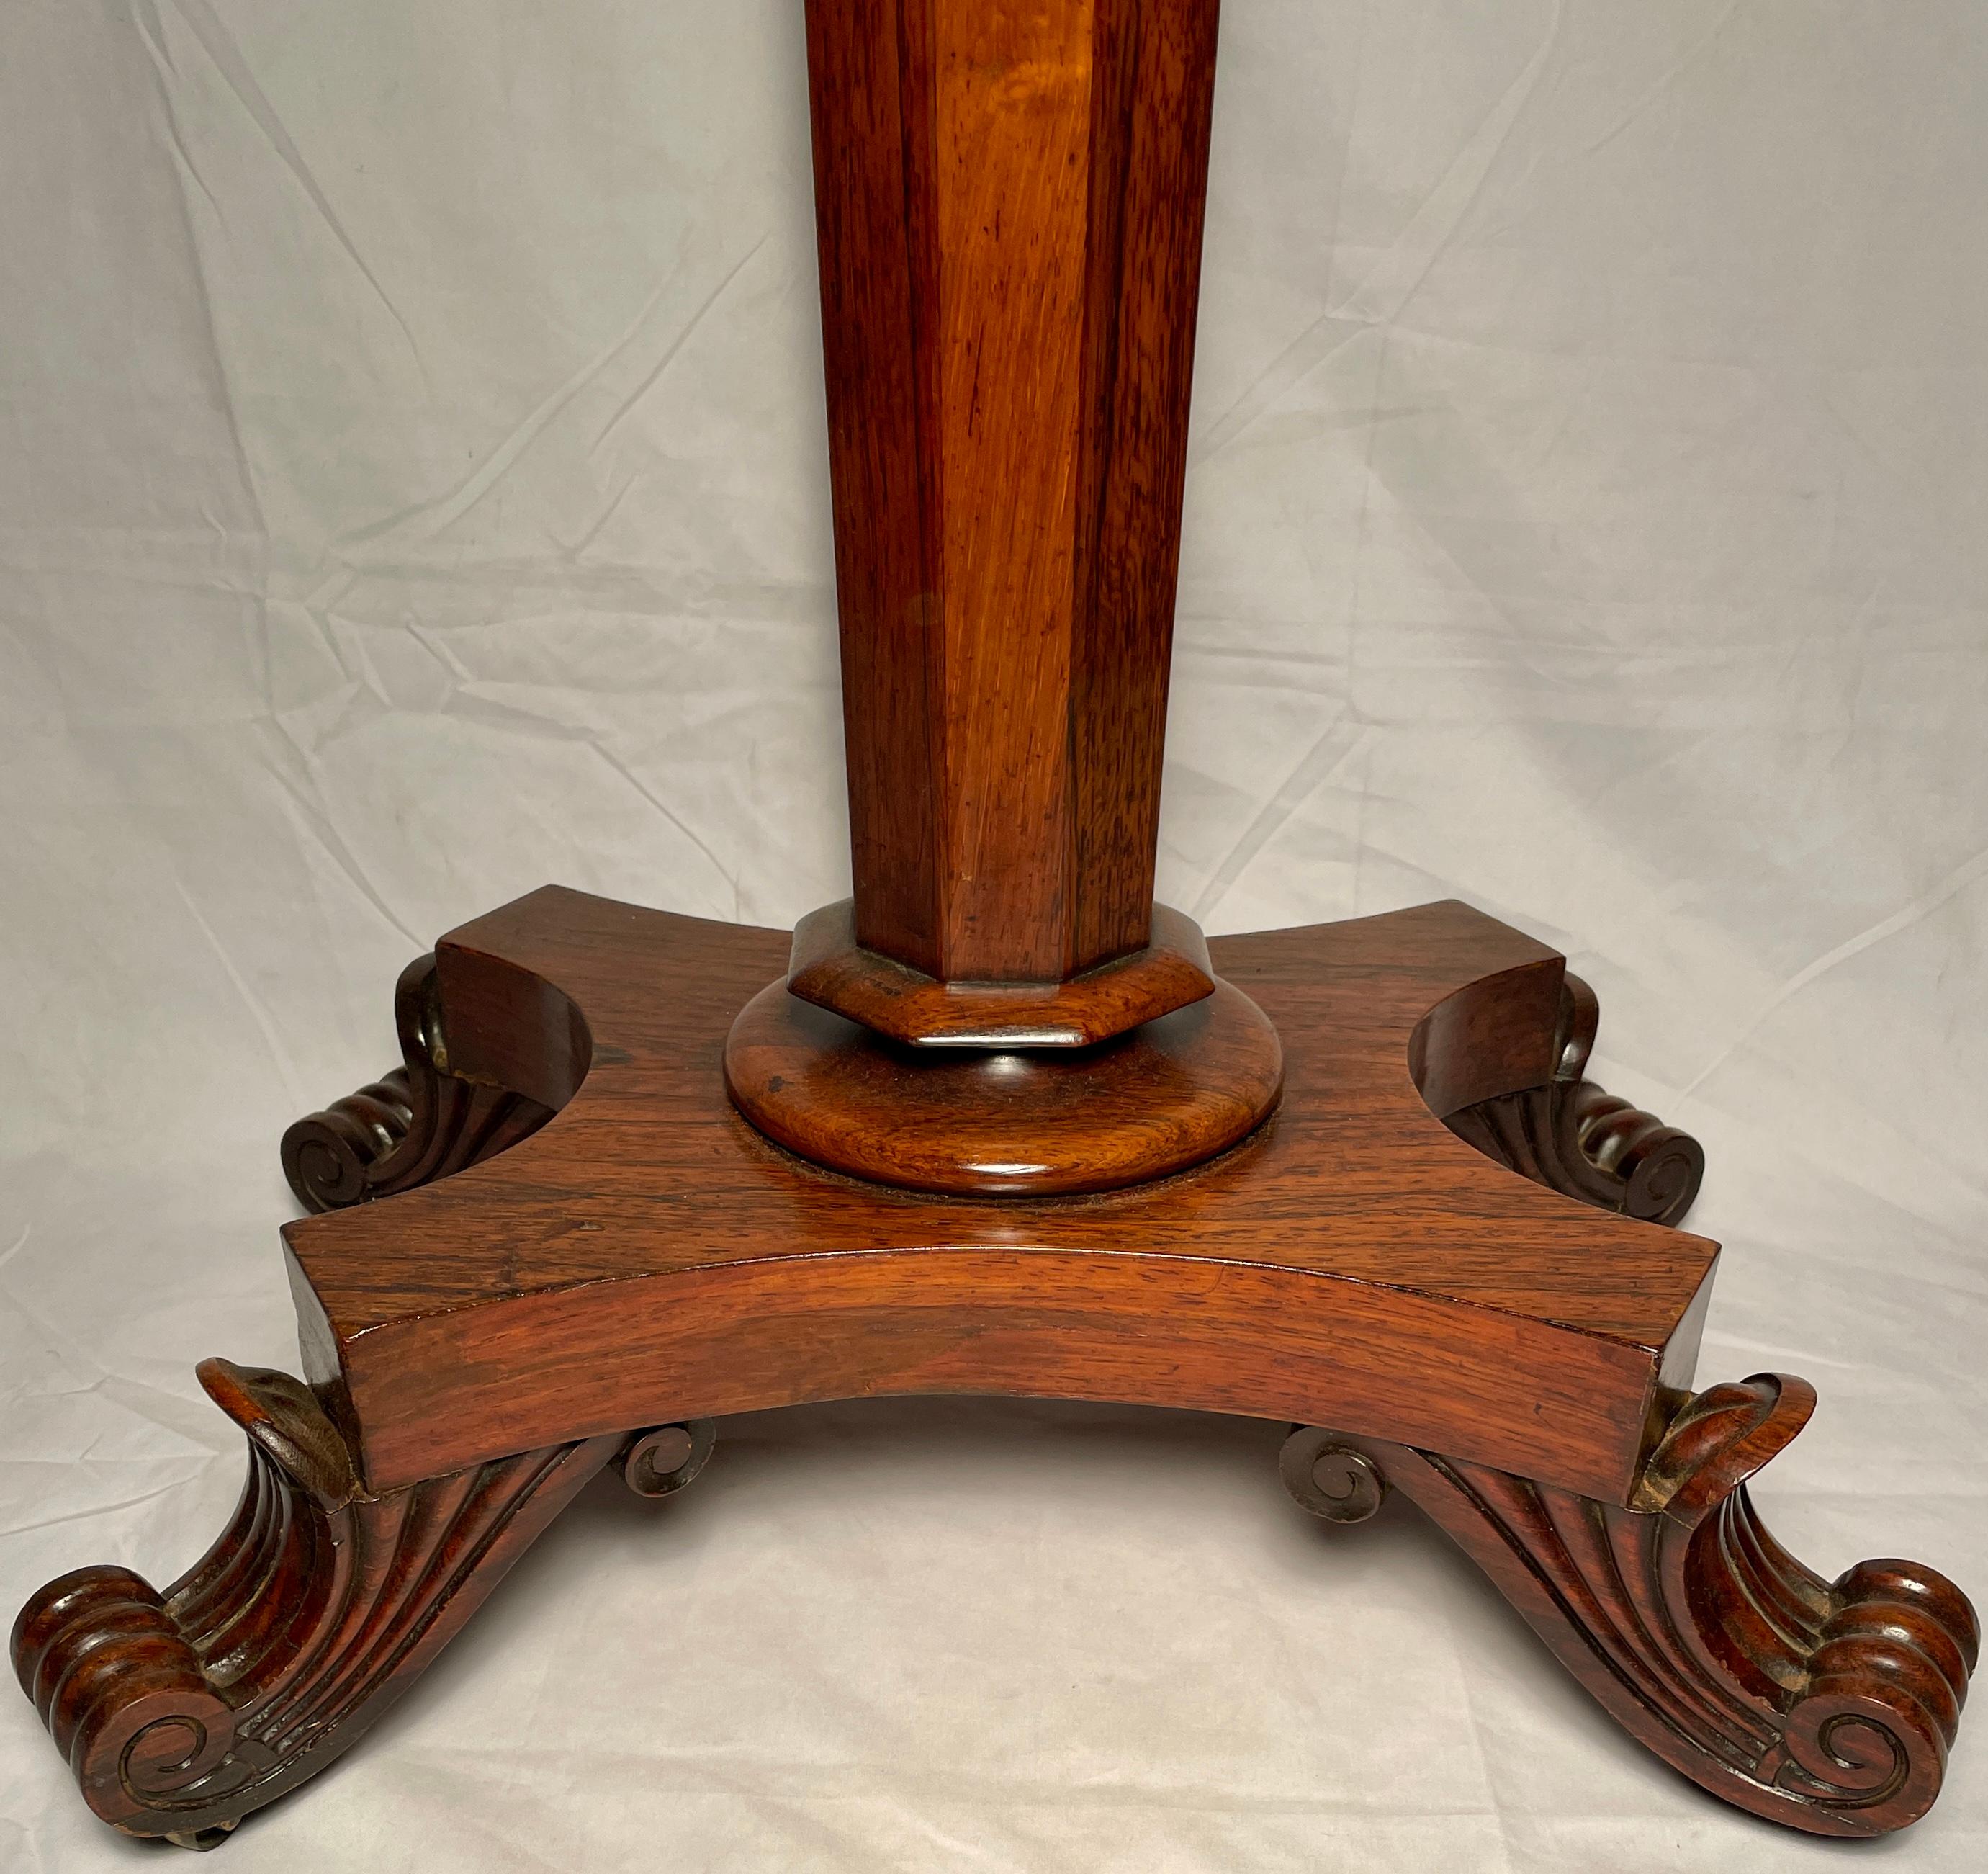 19th Century Antique English Rosewood Teapoy Table with Complete Interior, Circa 1845-1865. For Sale